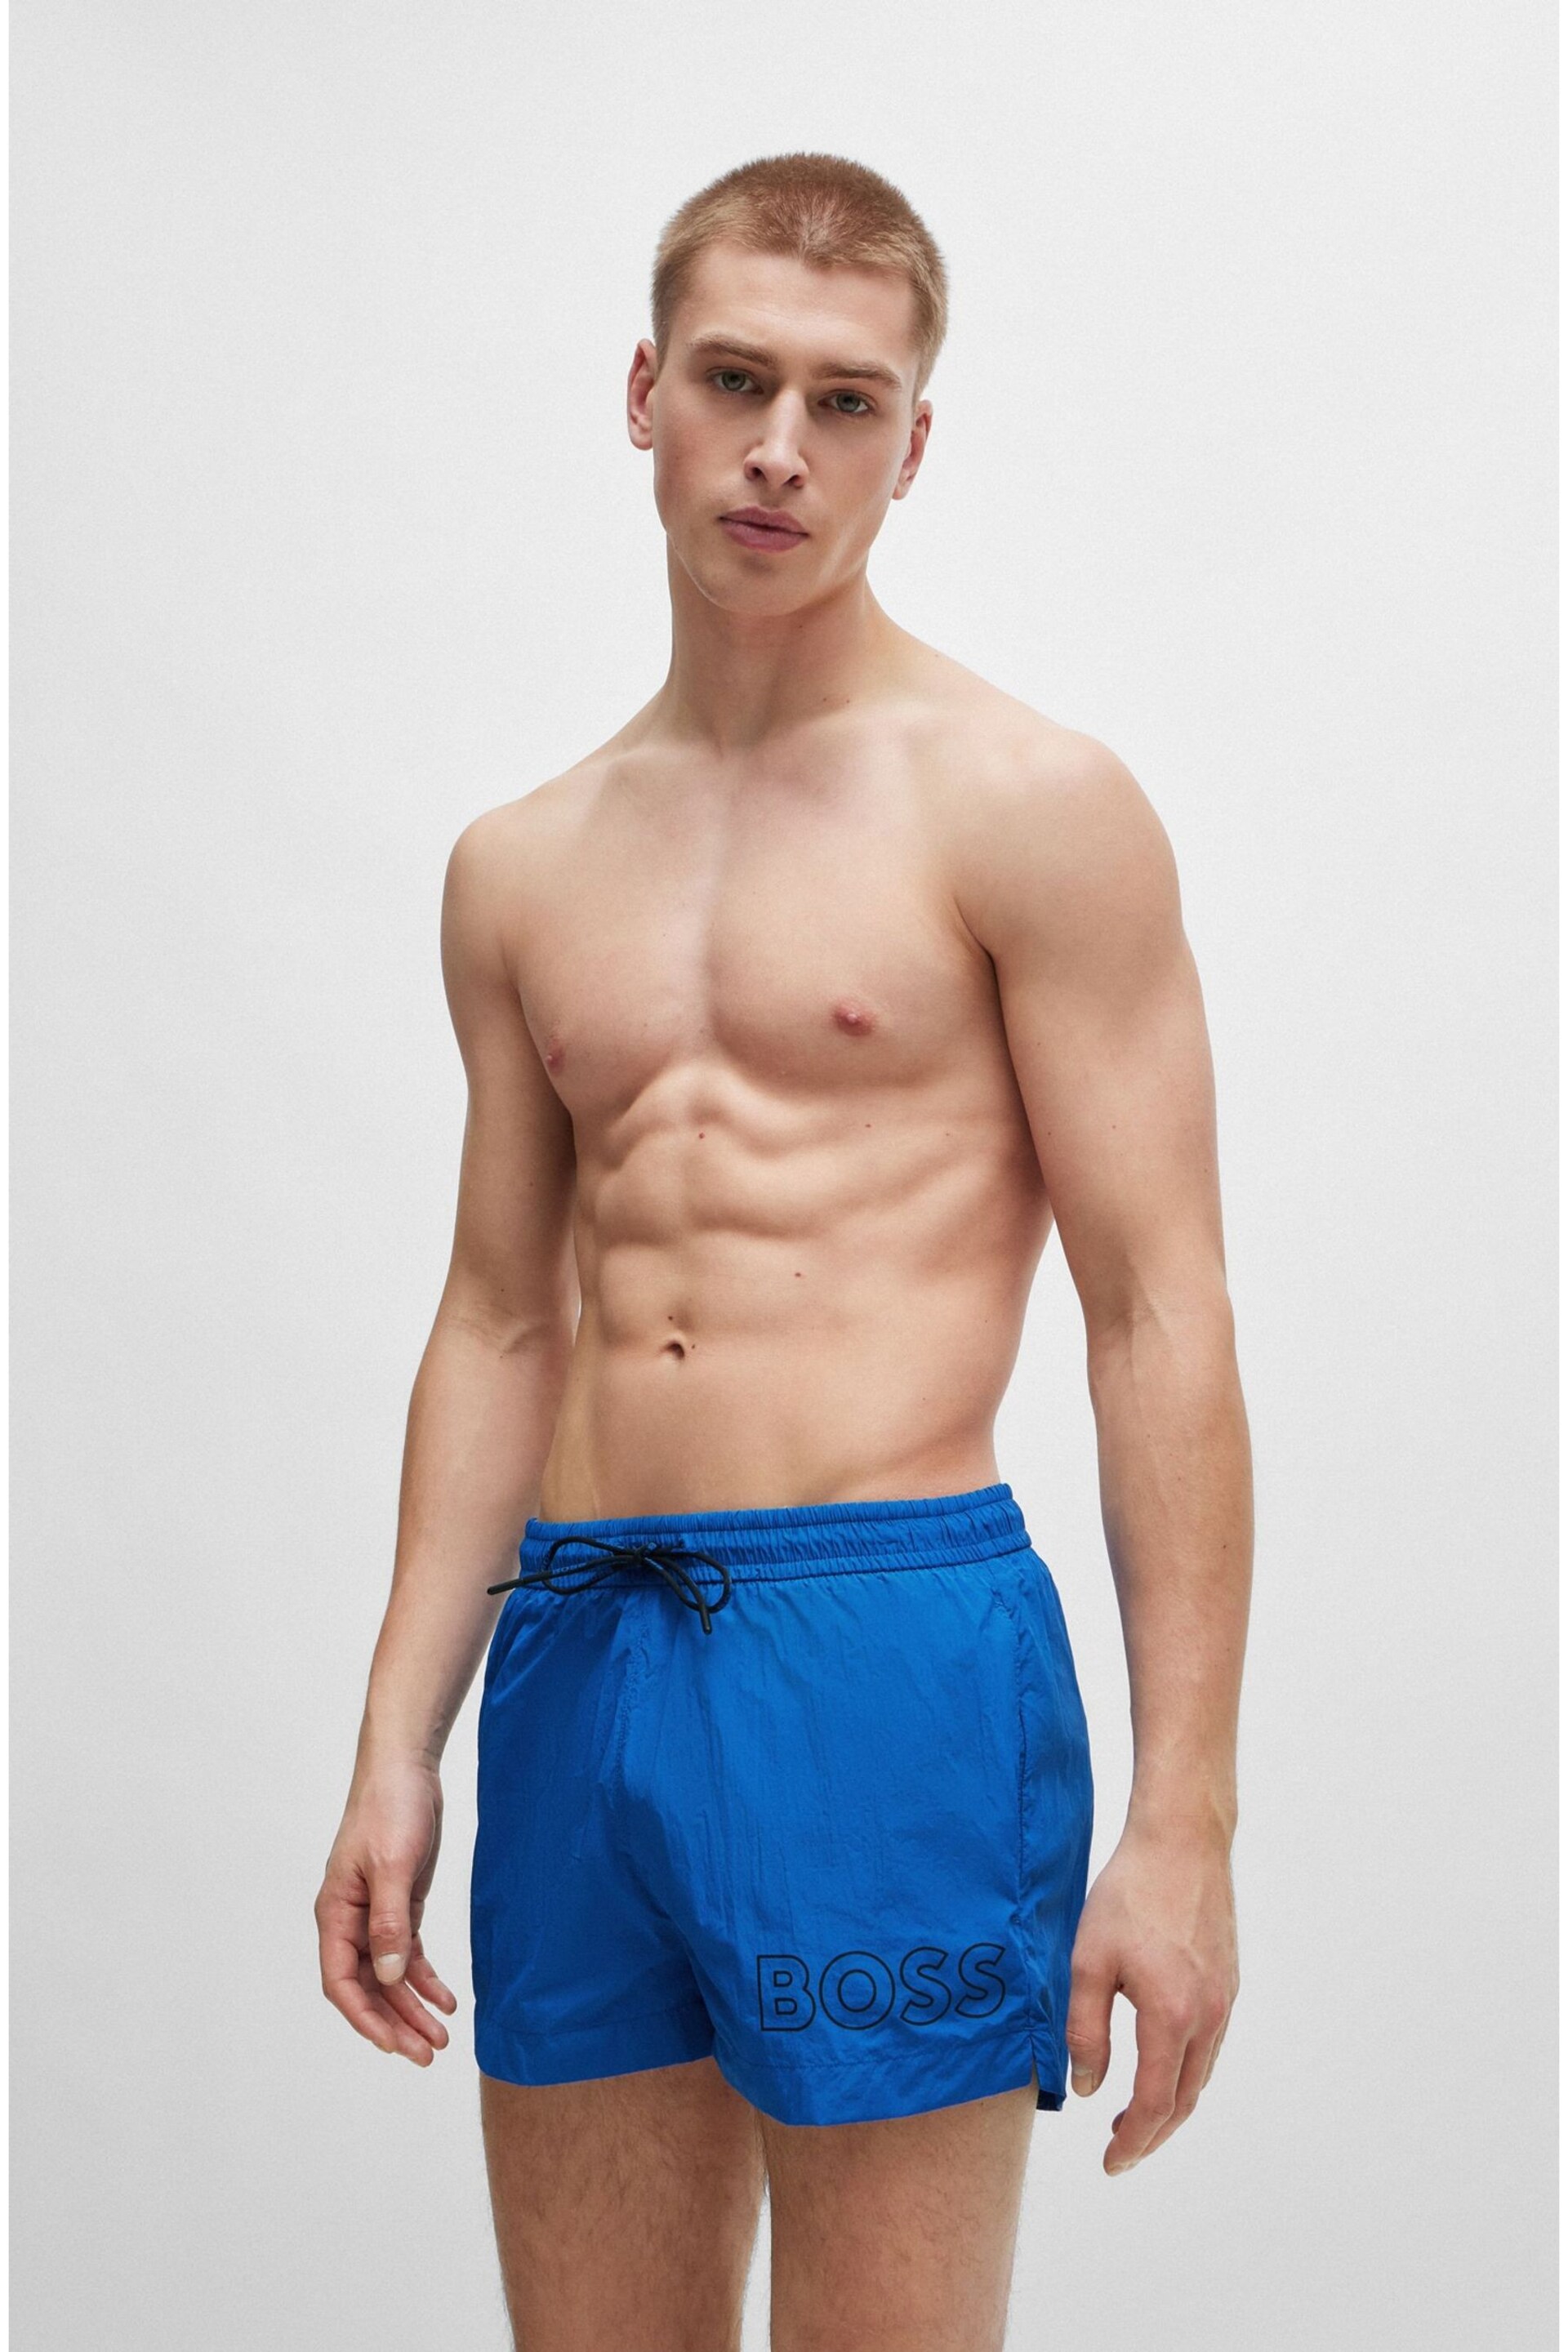 BOSS Blue Quick-Dry Outlined Logo Swim Shorts - Image 1 of 4